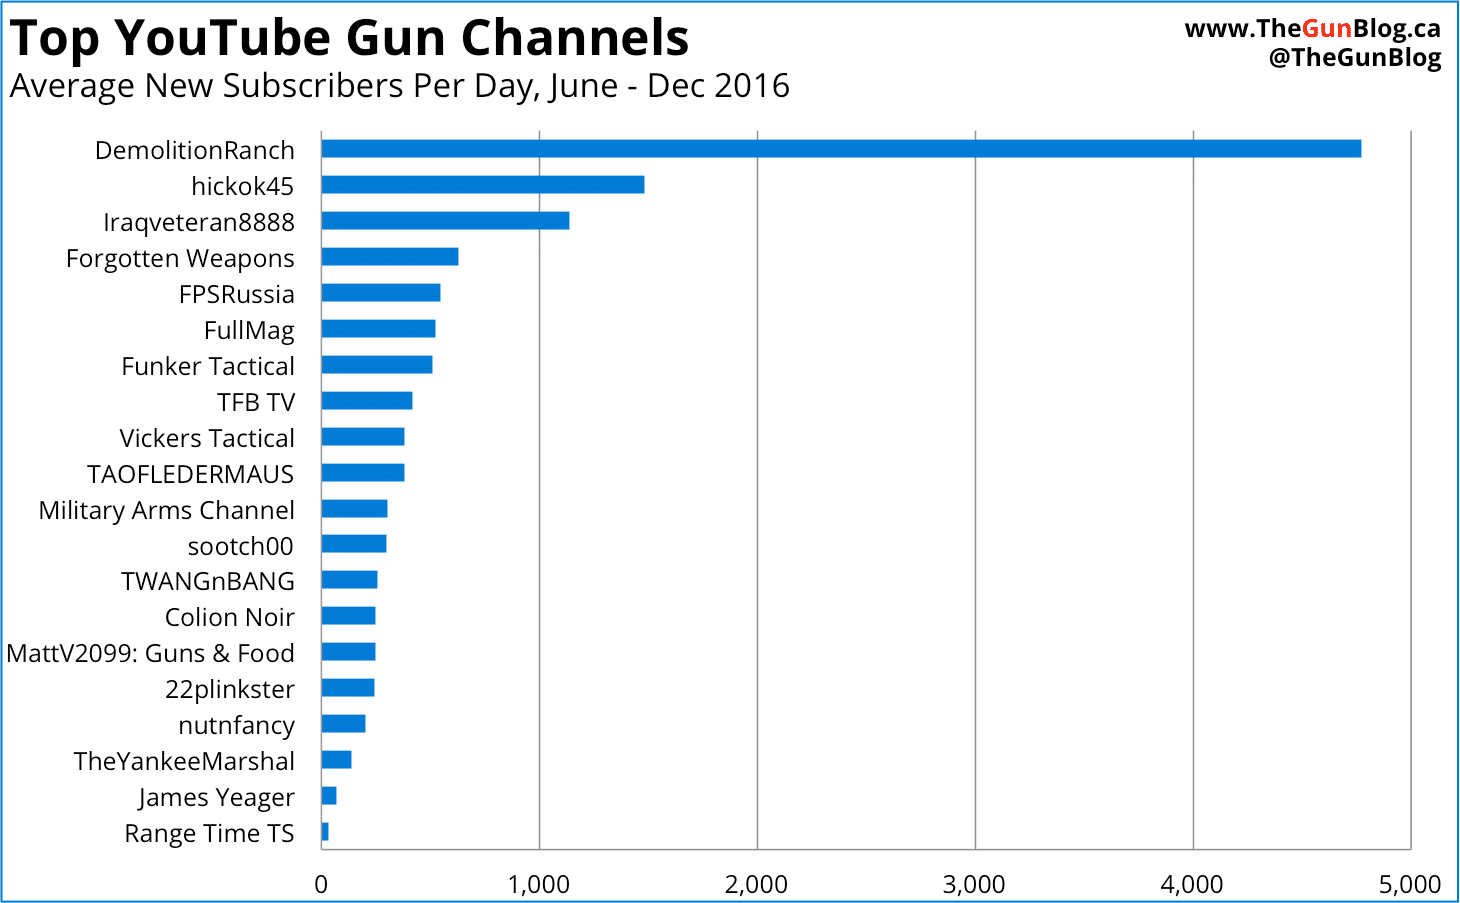 Top YouTube Gun Channels by New Subscribers Per Day